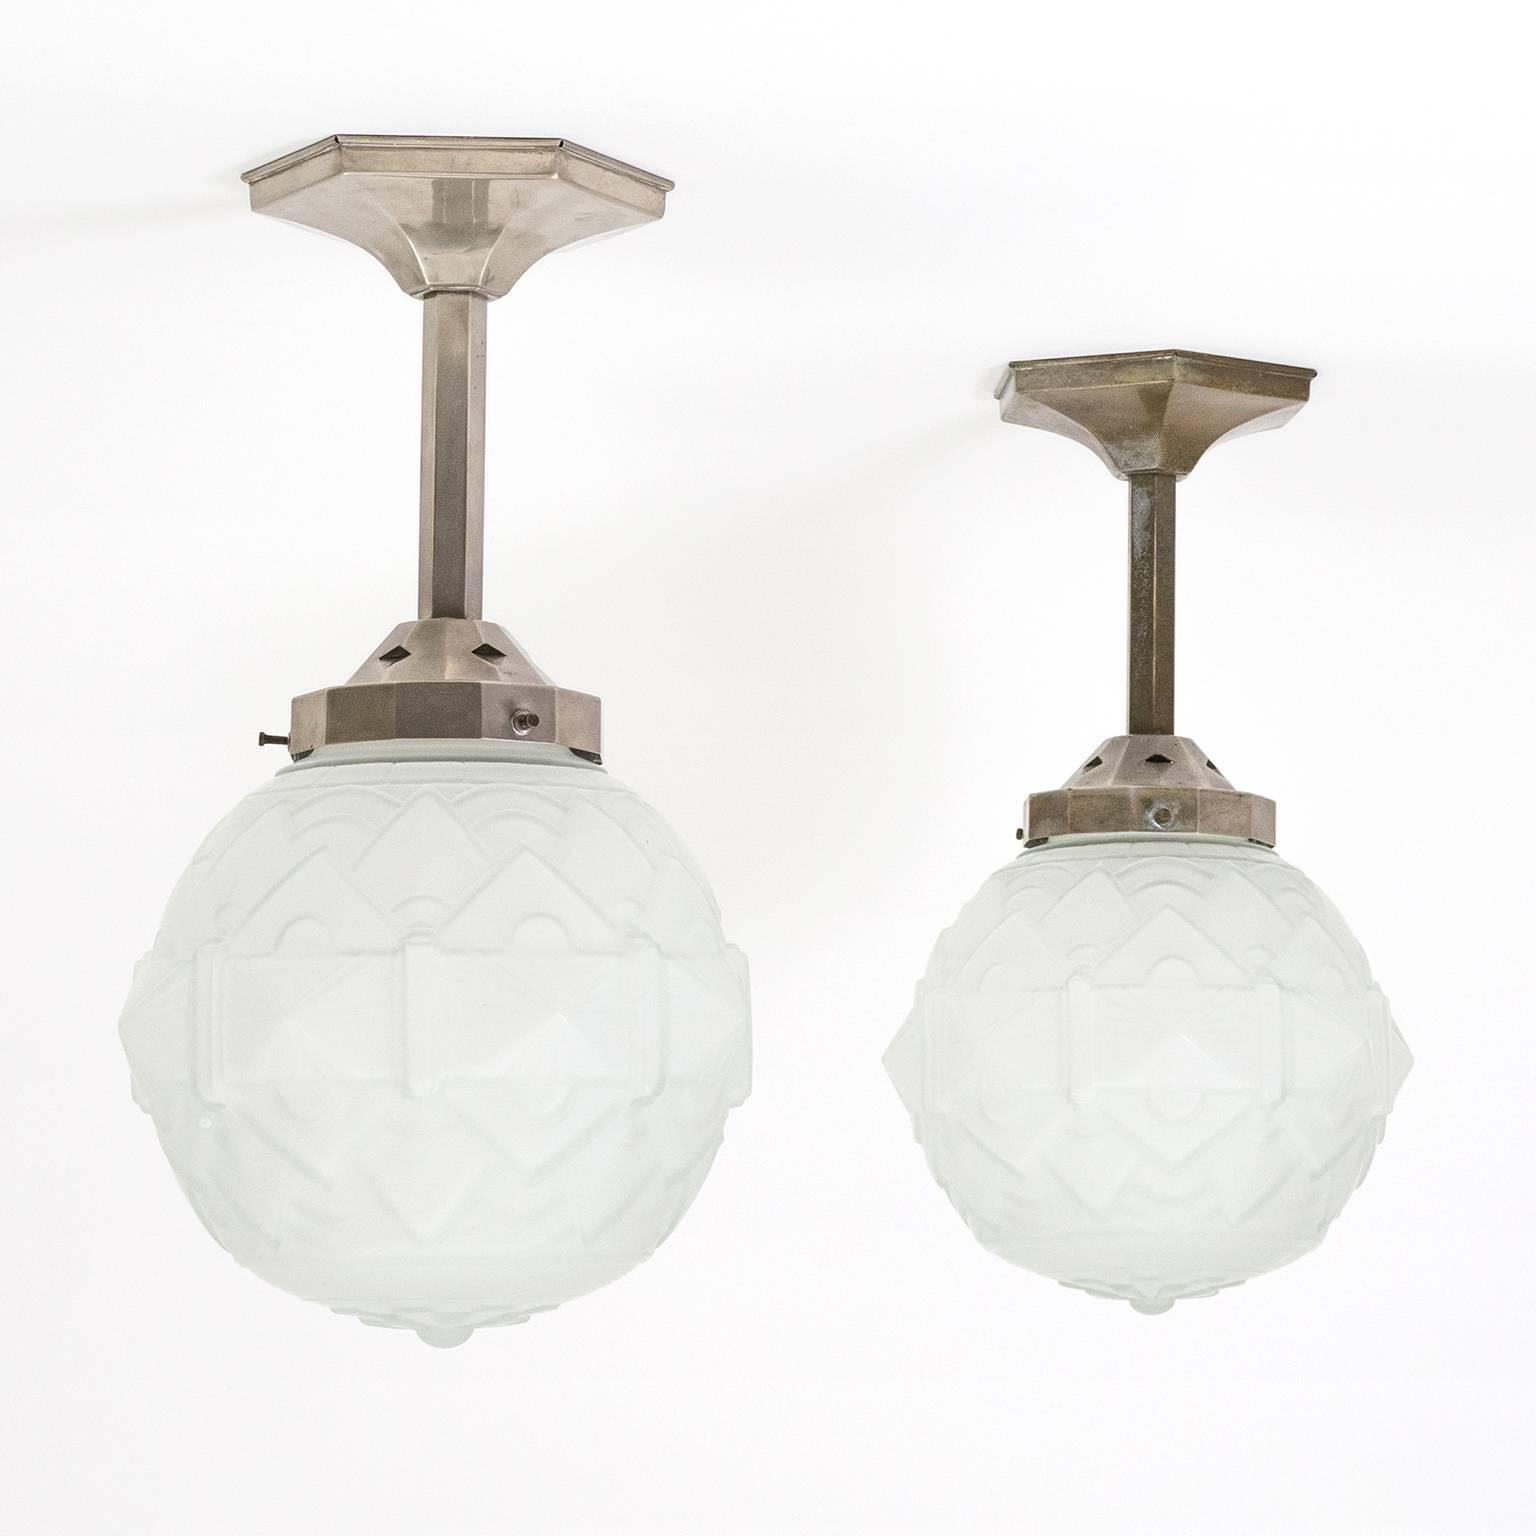 Mid-20th Century Pair of French Nickel and Satin Glass Art Deco Ceiling Lights, 1930s